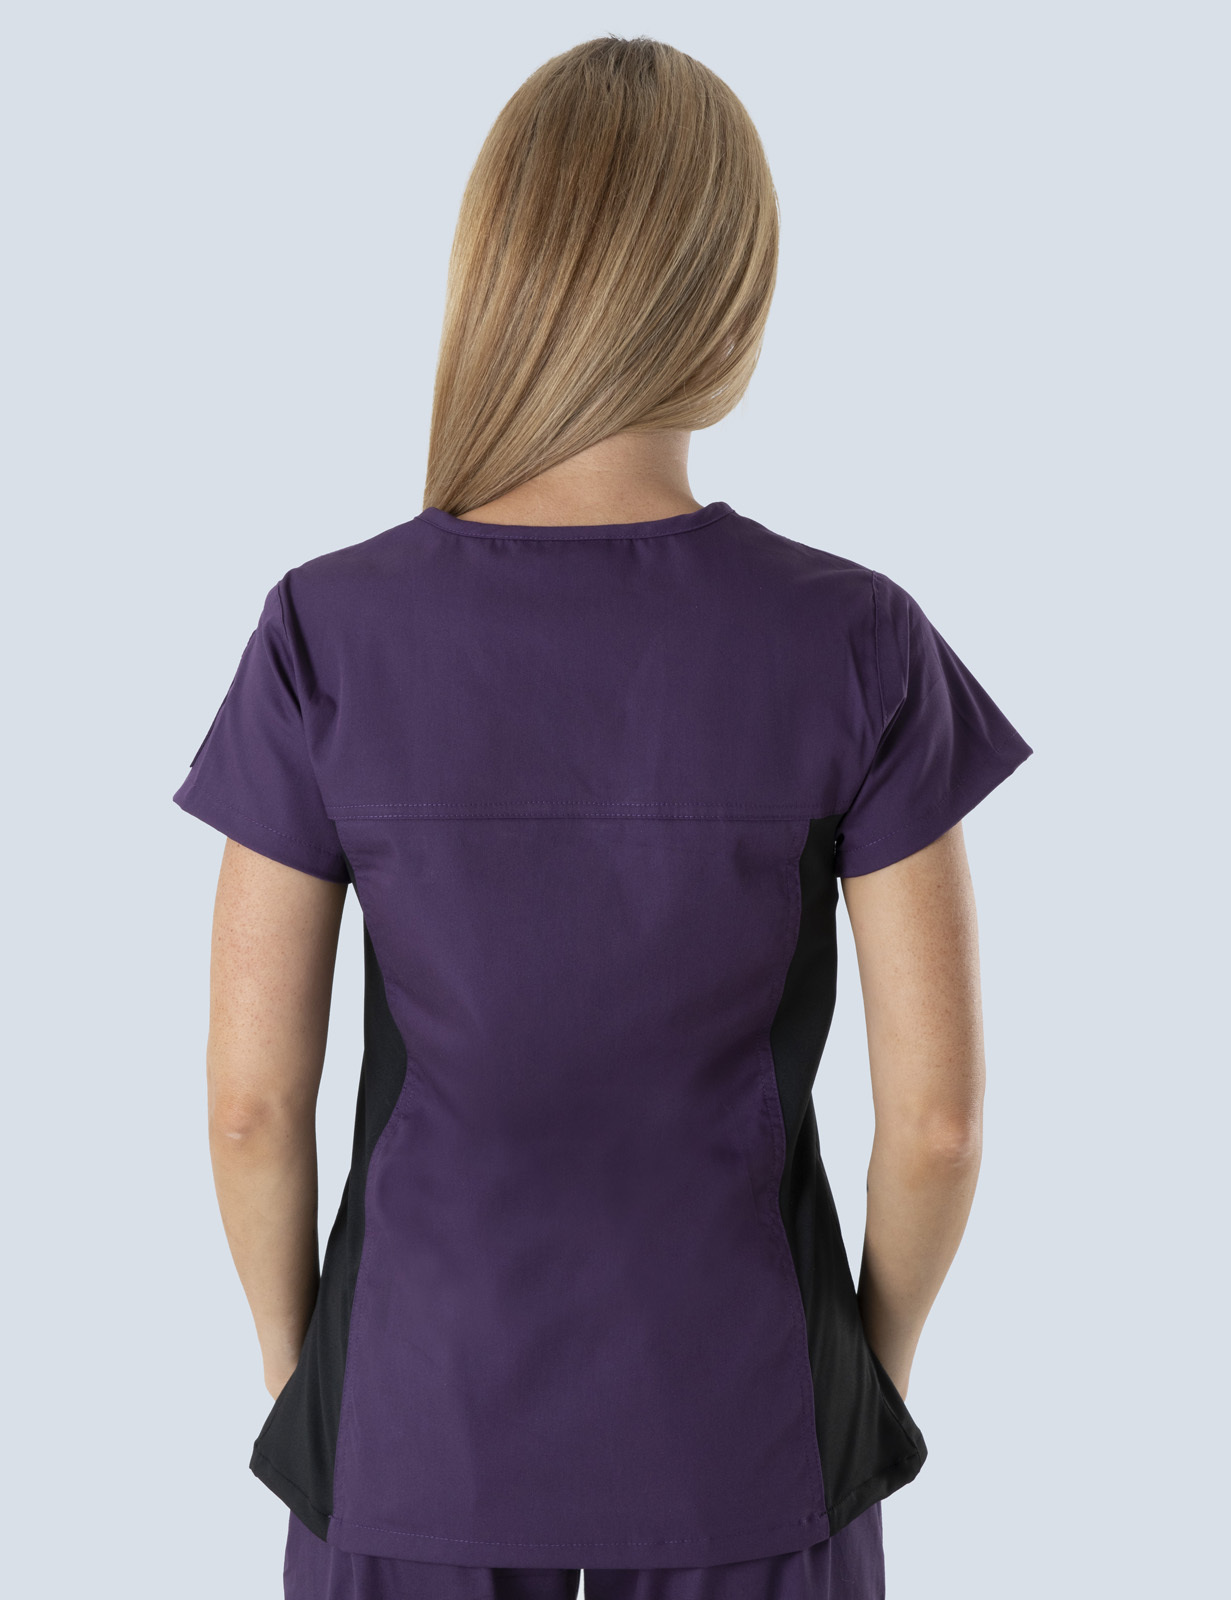 Women's Fit Solid Scrub Top With Spandex Panel - Aubergine - Small